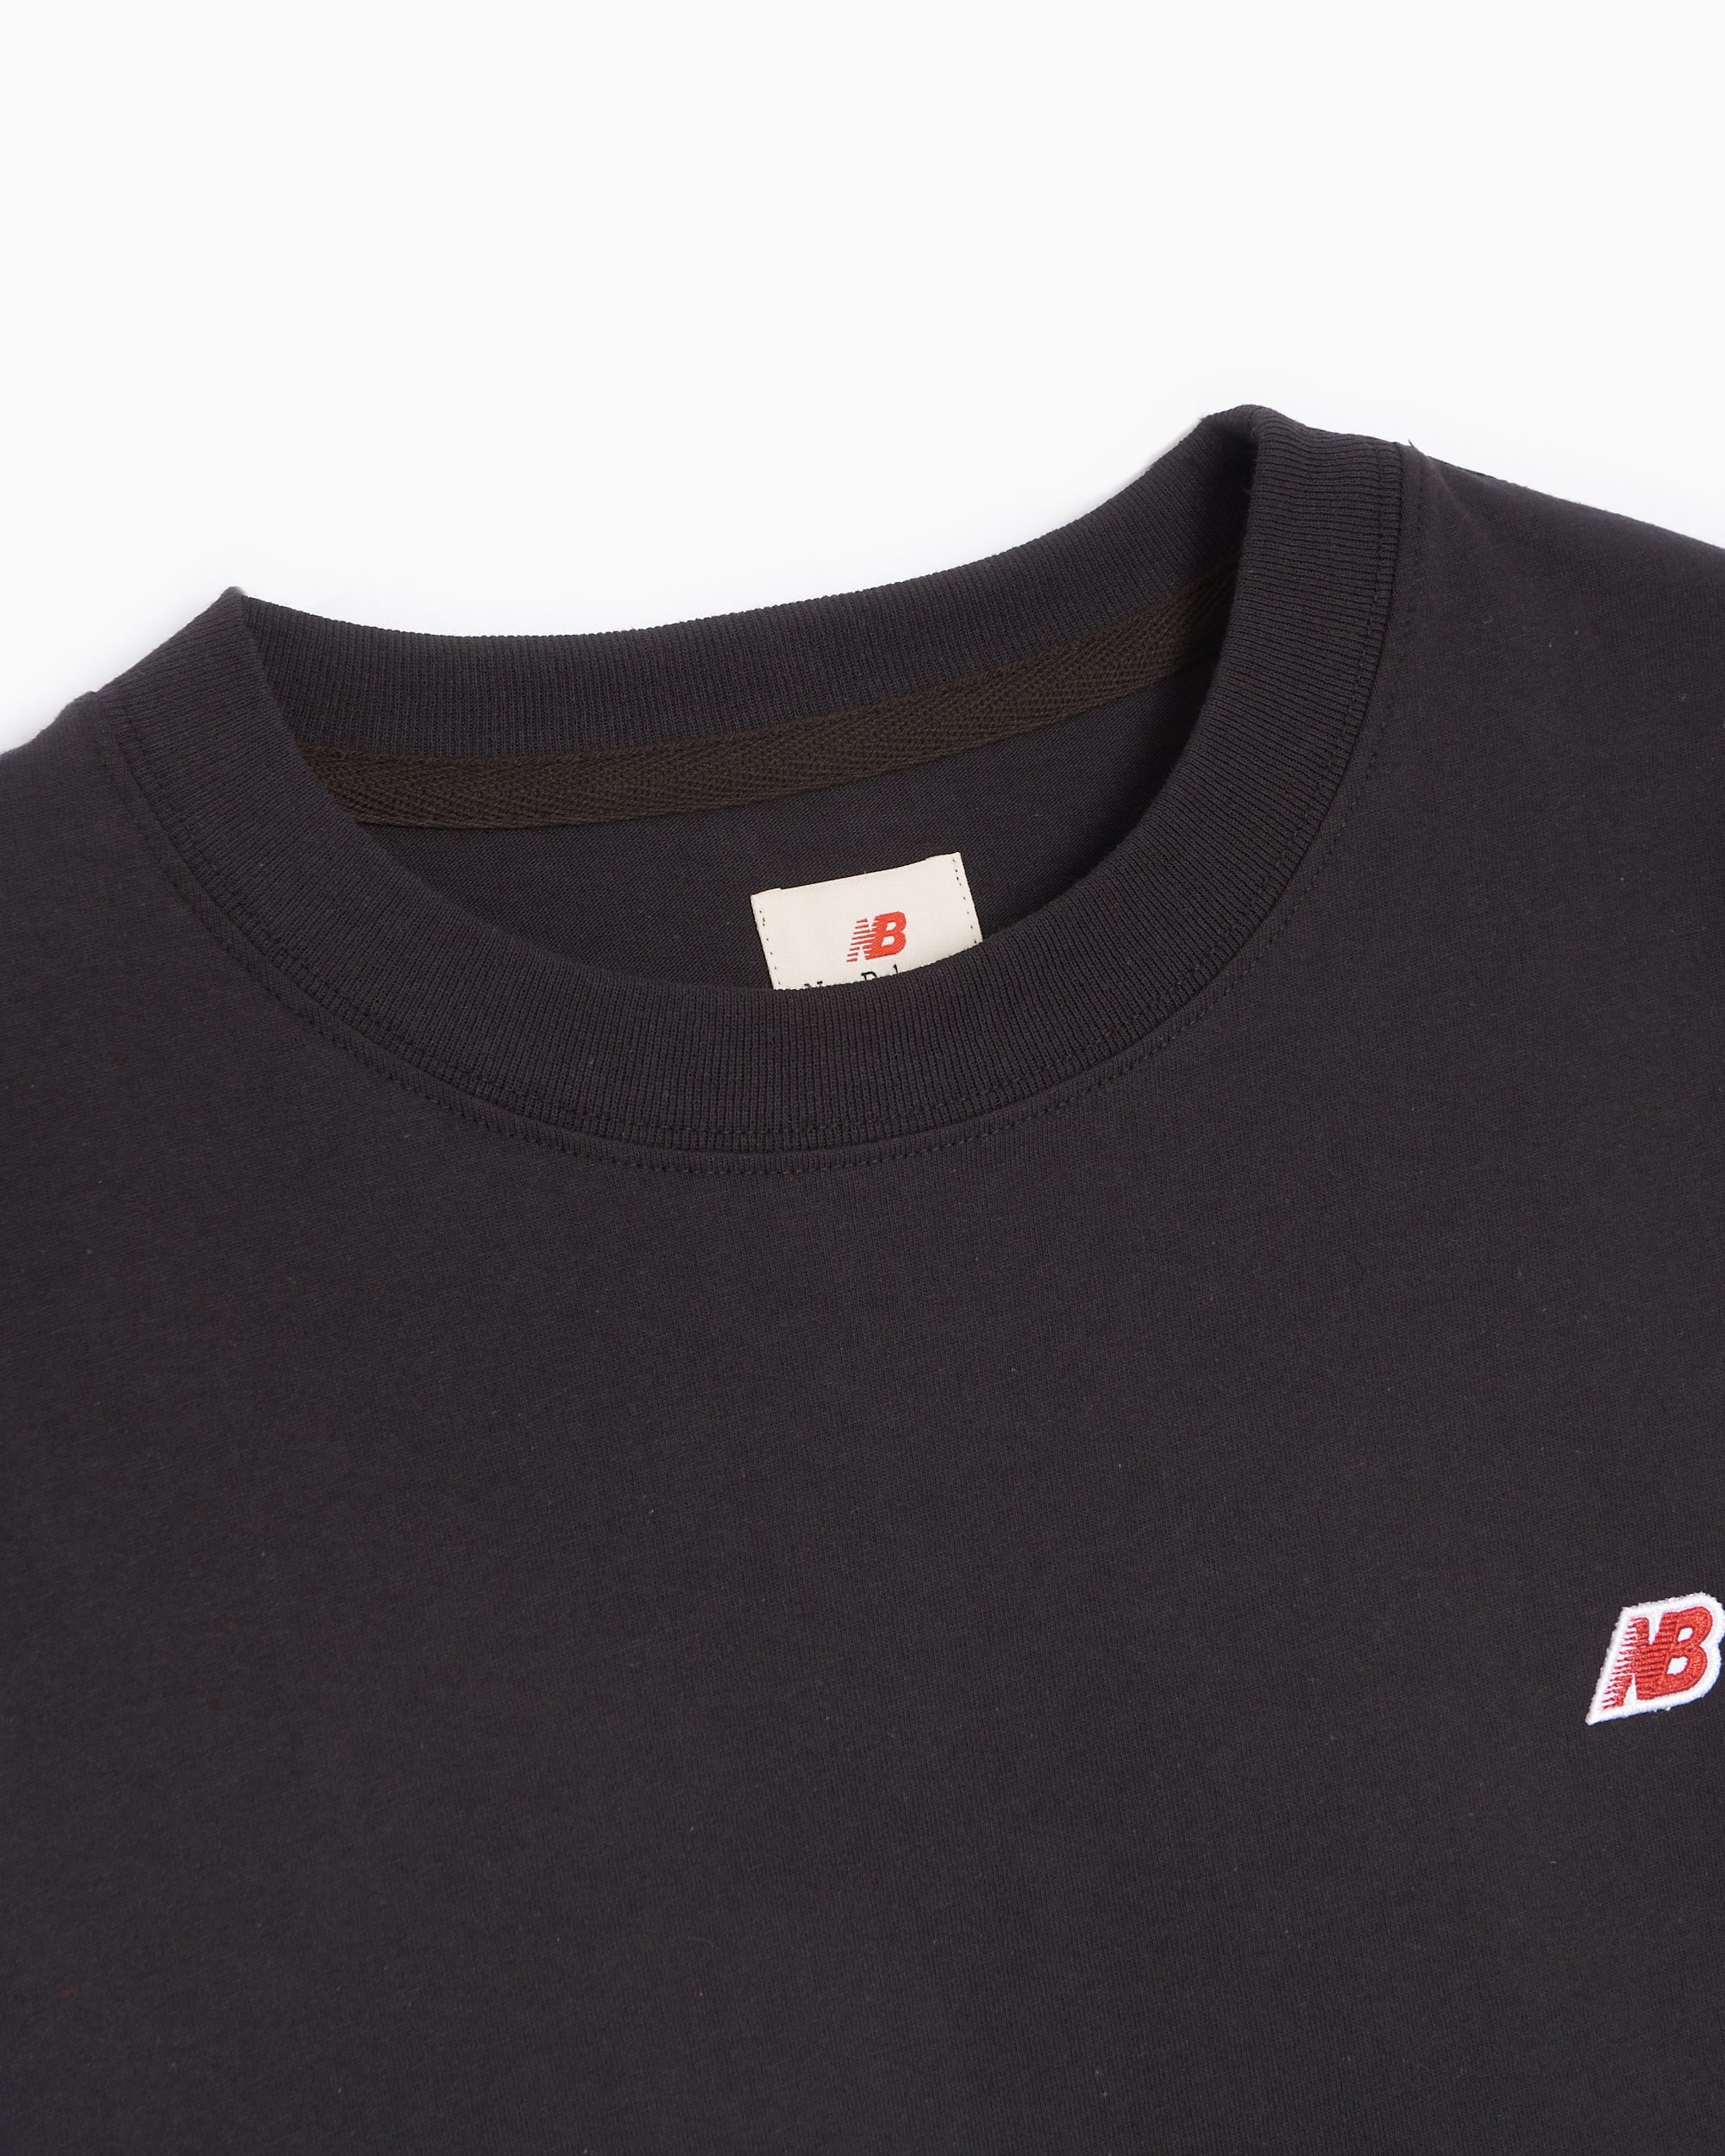 Unisex FOOTDISTRICT Buy Black Balance USA MT21543-BK| New in at Core T-Shirt Made Online